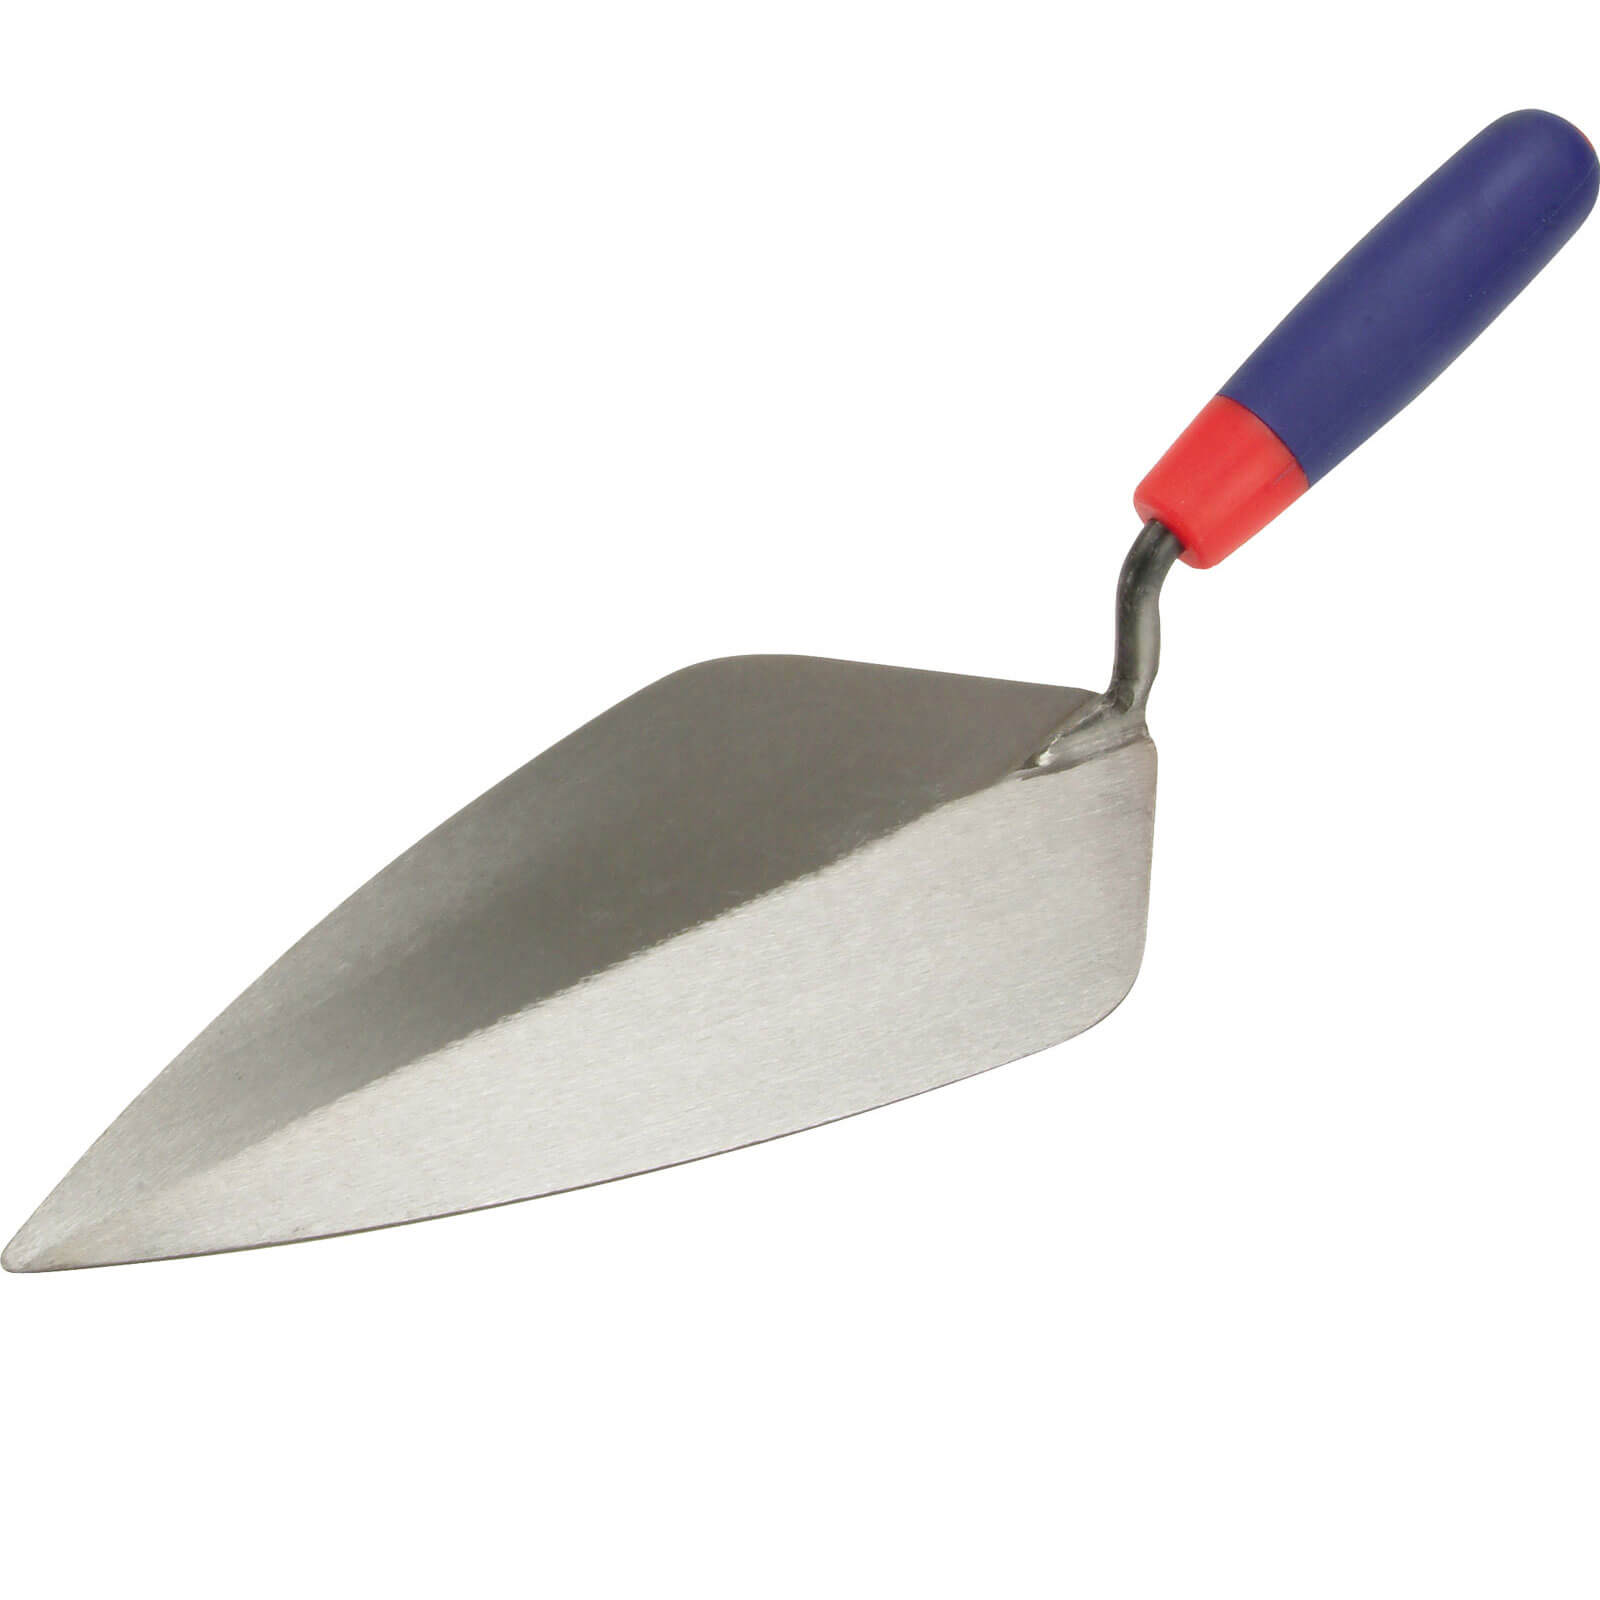 Rst Soft Touch Brick Trowel 11" Rtr10611S